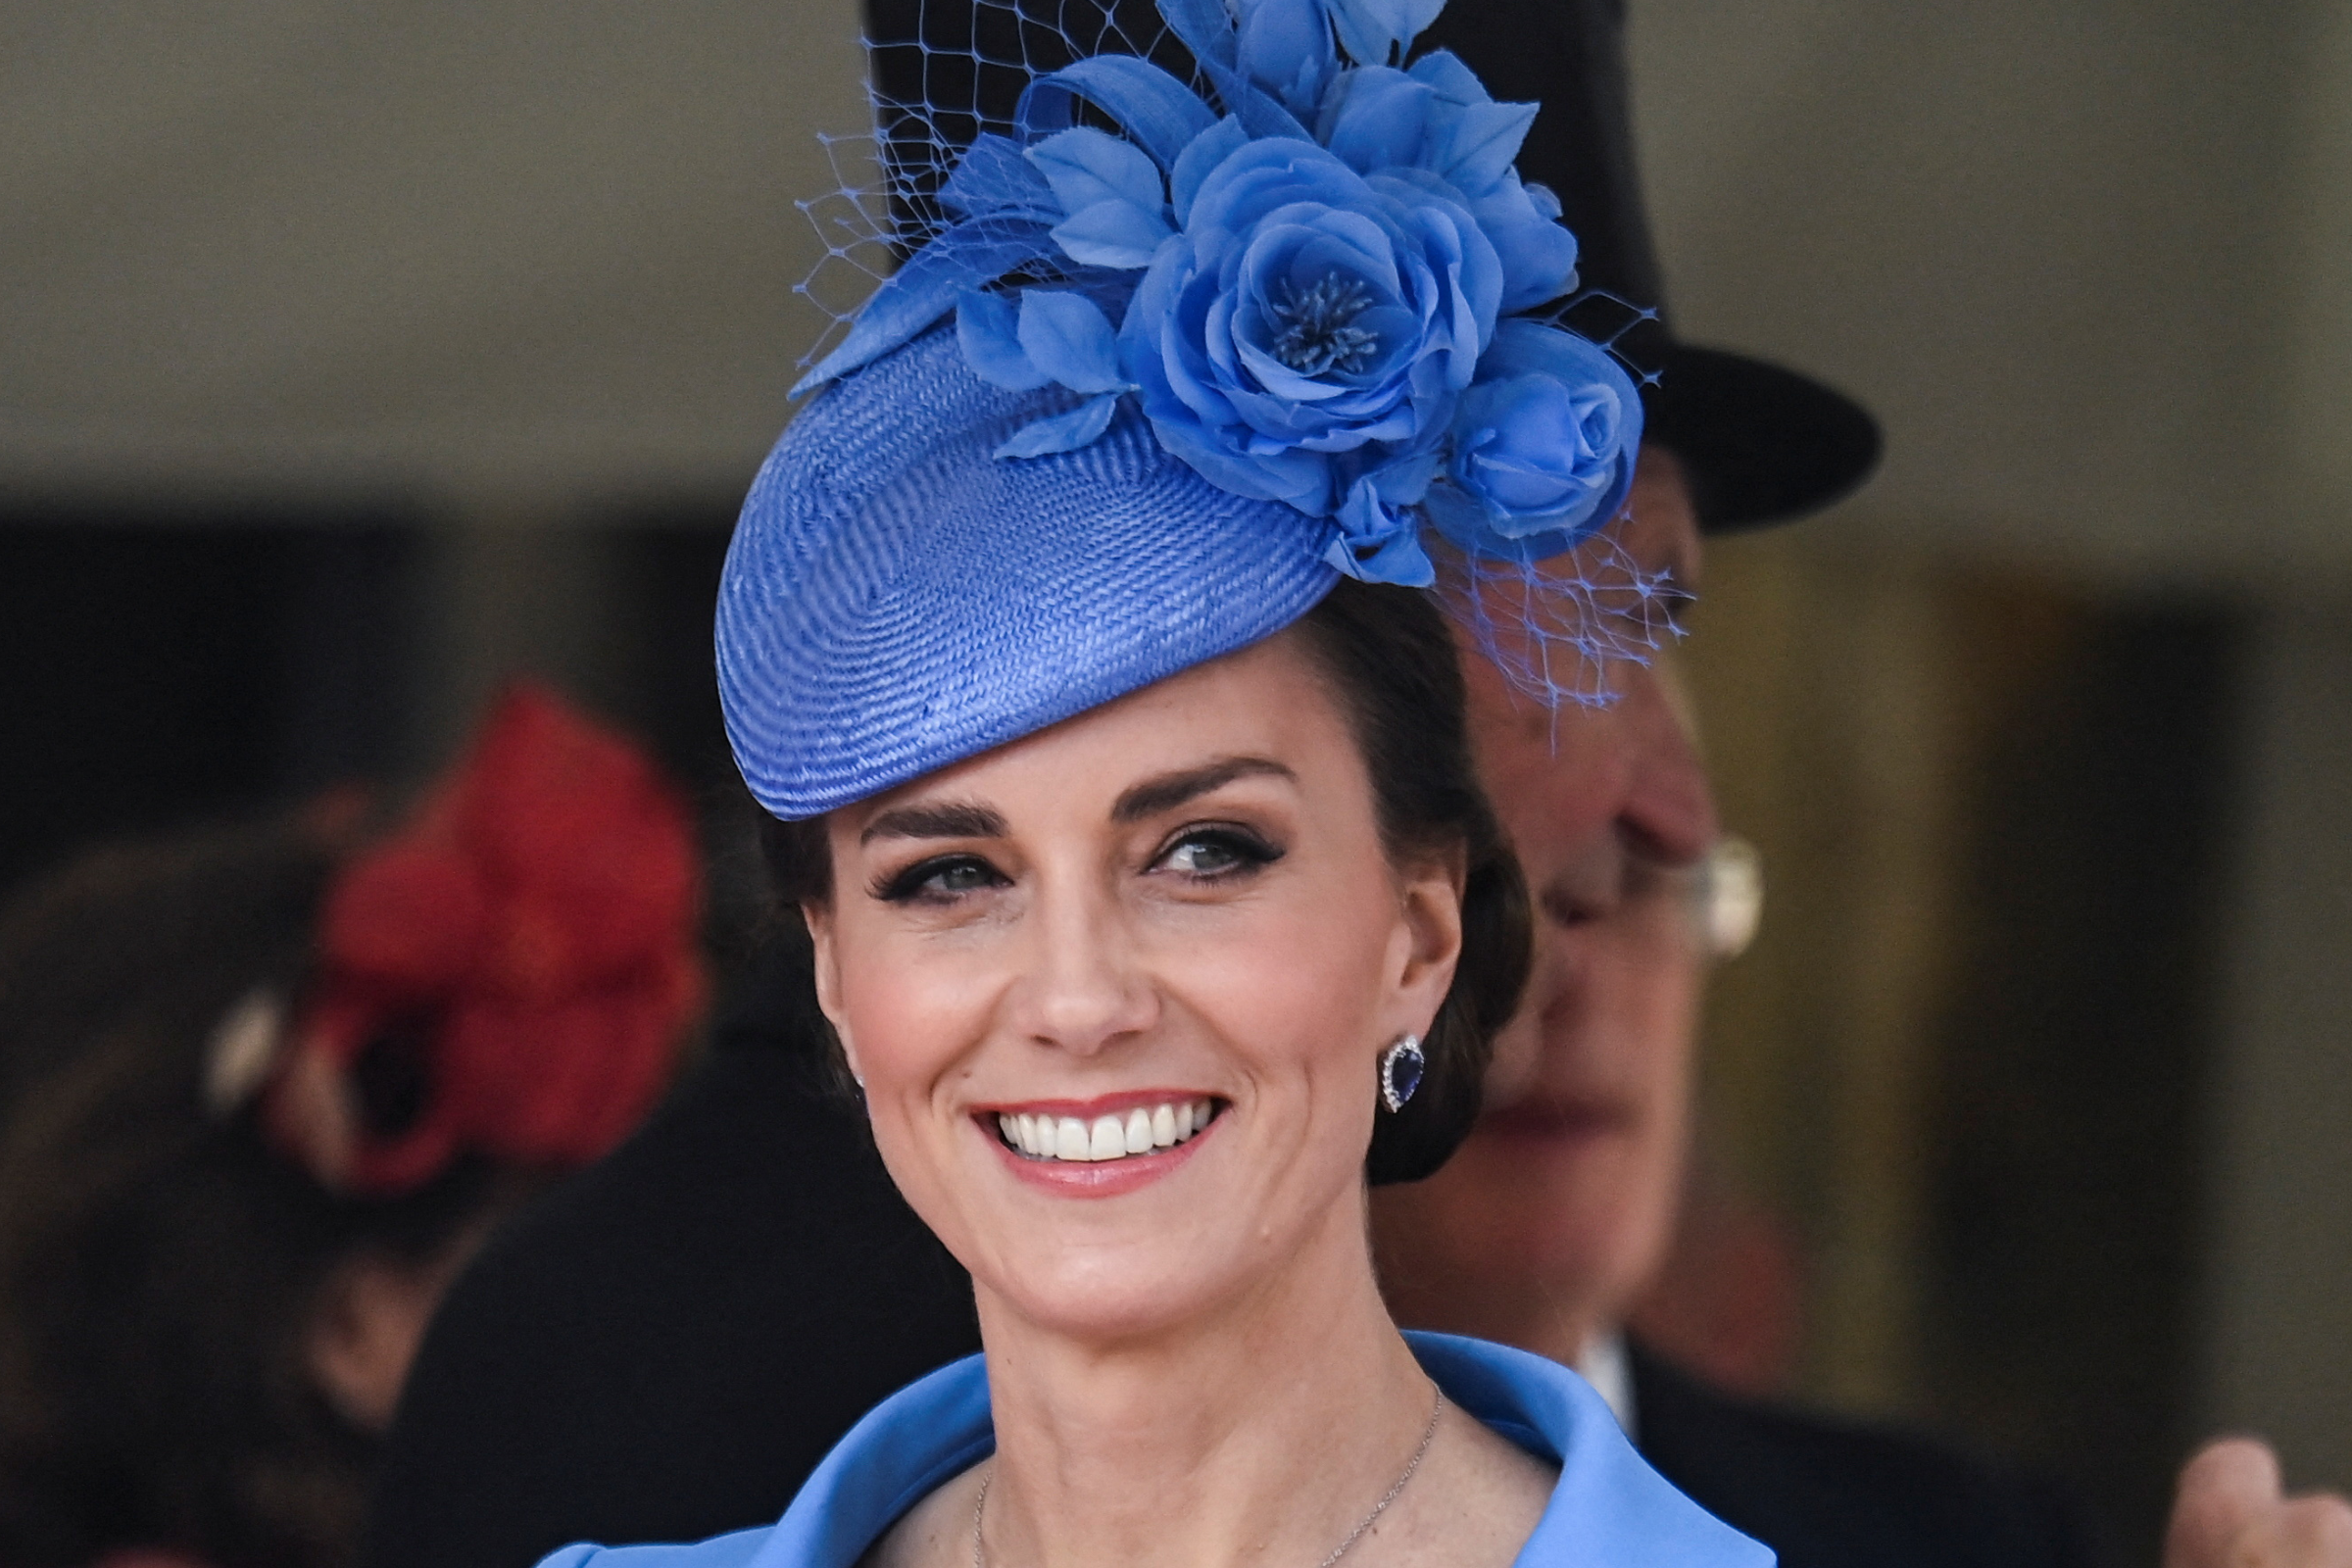 Kate Middleton news & pictures from Newsweek.com